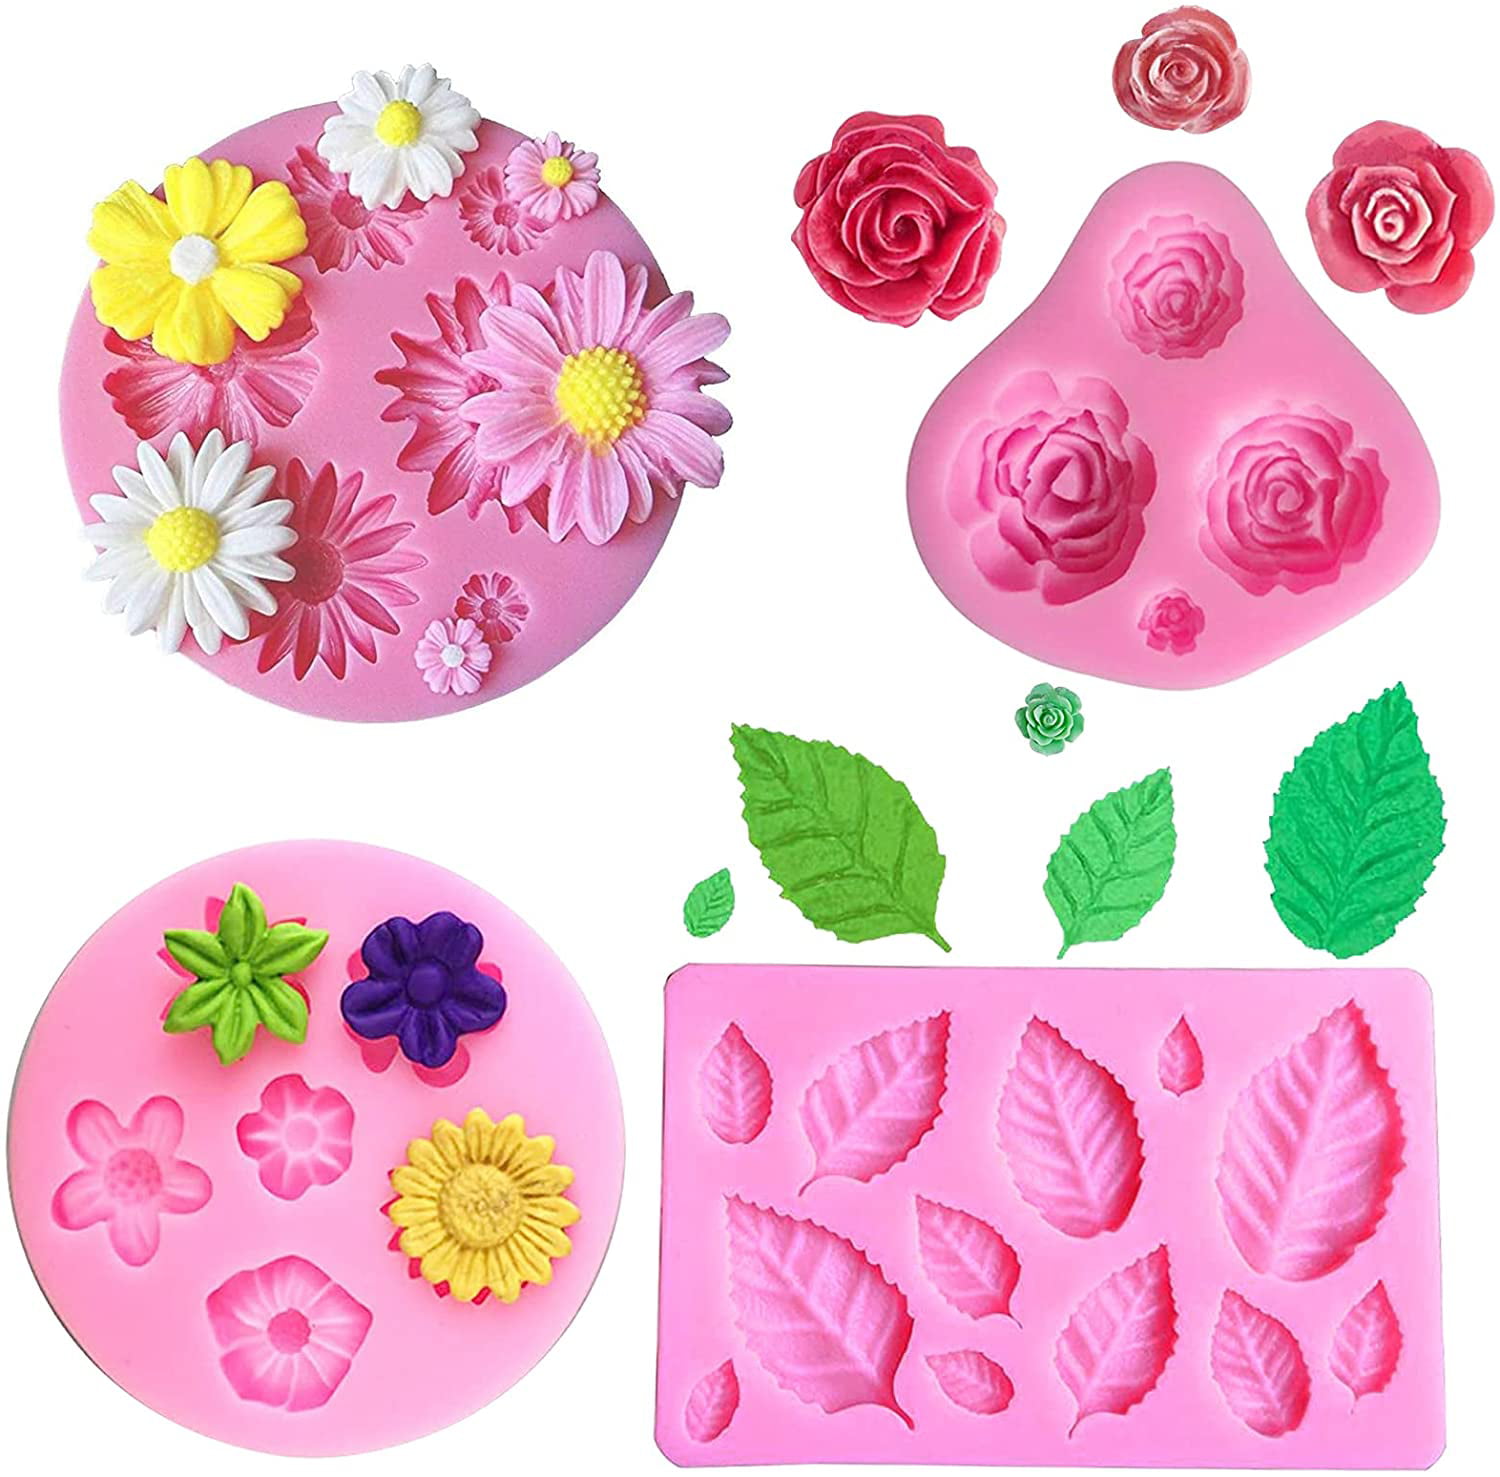 Daisy Flower， Small Flower and Leaf molds for Chocolate Fondant Crafting Cake Decoration 4Pcs Flowers Silicone Molds Candy Fondant Chocolate Mold， Roses Flower DIY Sugar Crafts